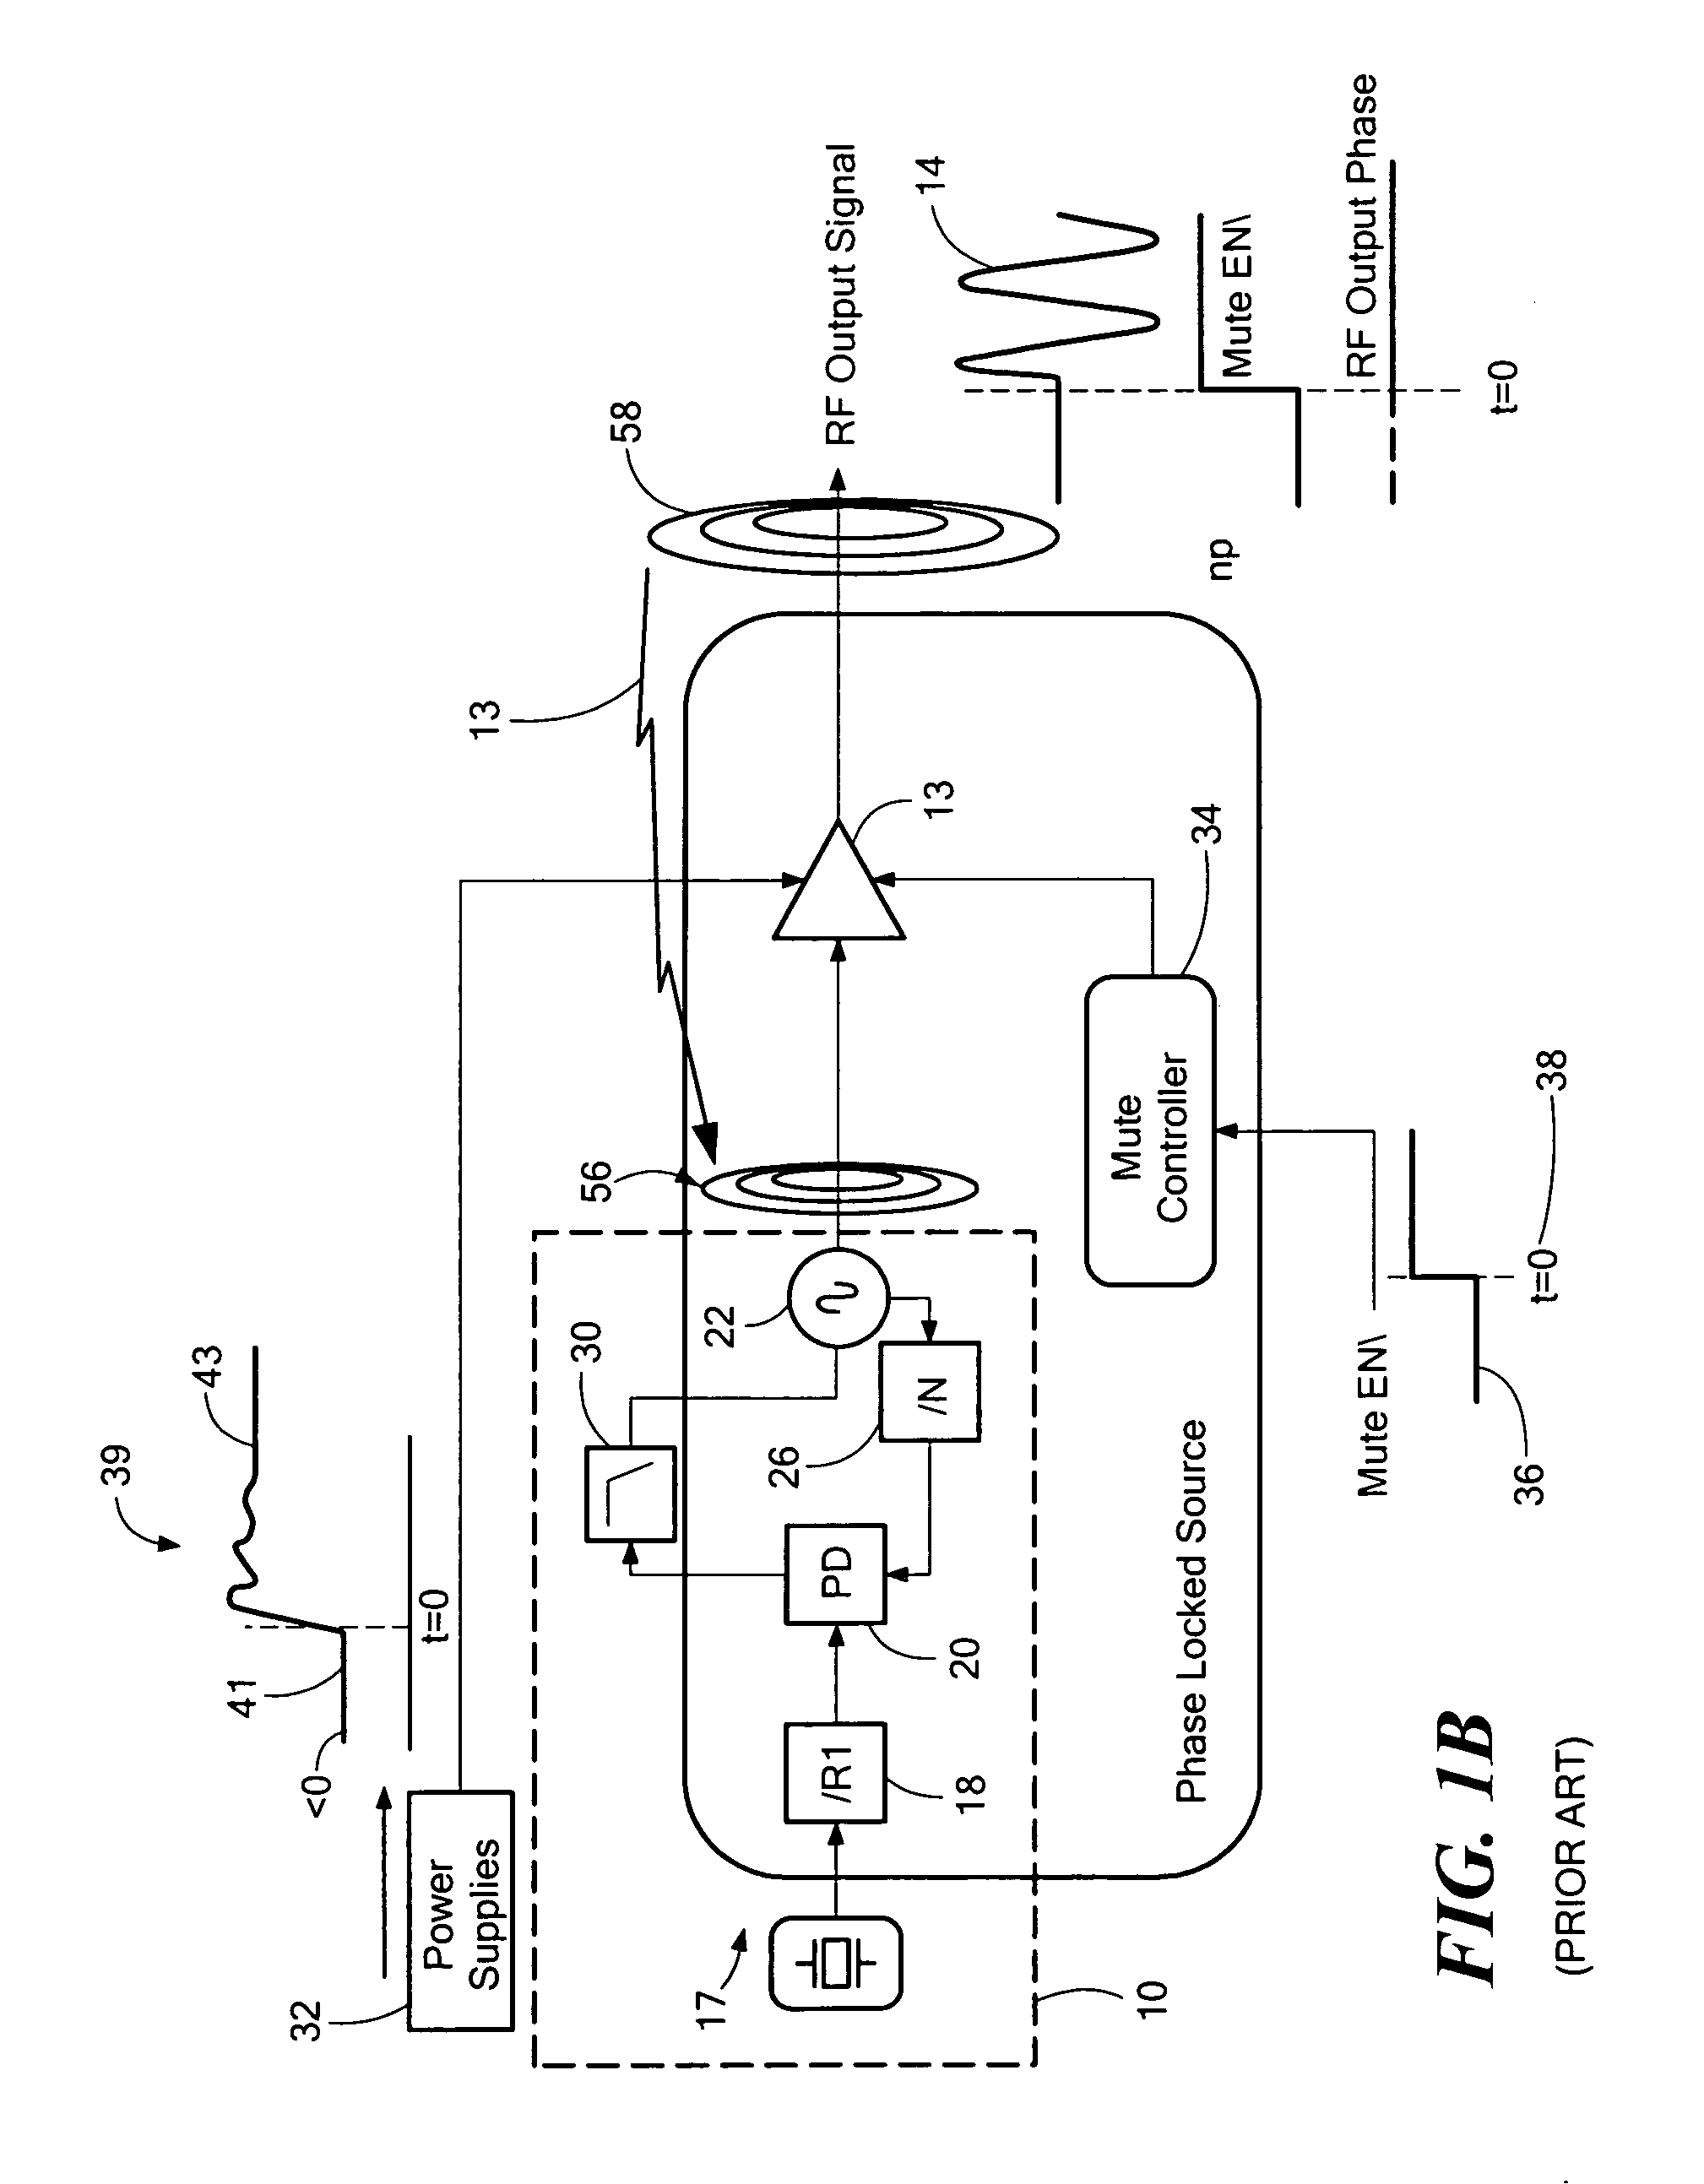 Fast turn on system for a synthesized source signal